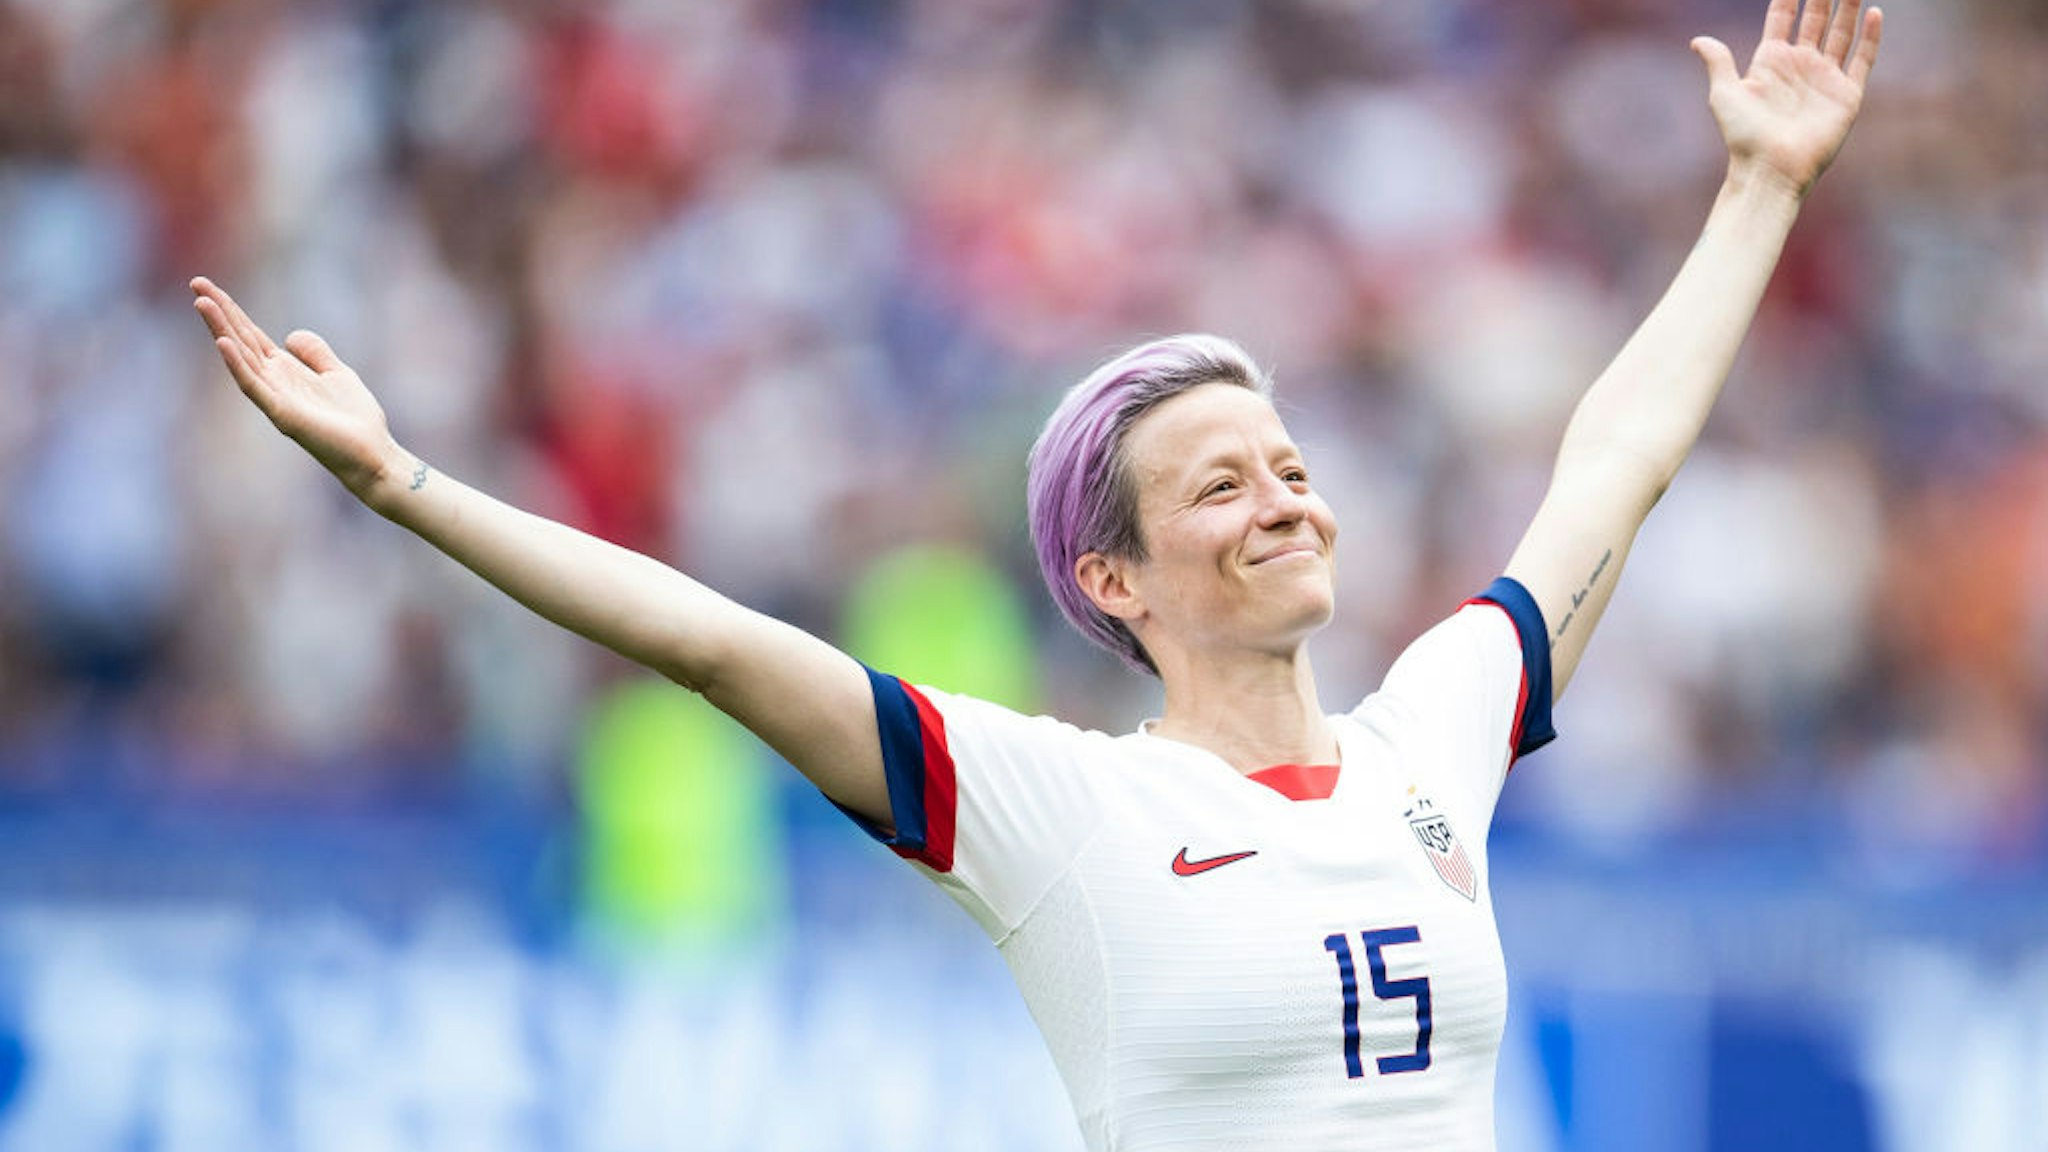 LYON, FRANCE - JULY 07: Megan Rapinoe of the USA celebrates following her sides victory in the 2019 FIFA Women's World Cup France Final match between The United States of America and The Netherlands at Stade de Lyon on July 07, 2019 in Lyon, France. (Photo by Maja Hitij/Getty Images)